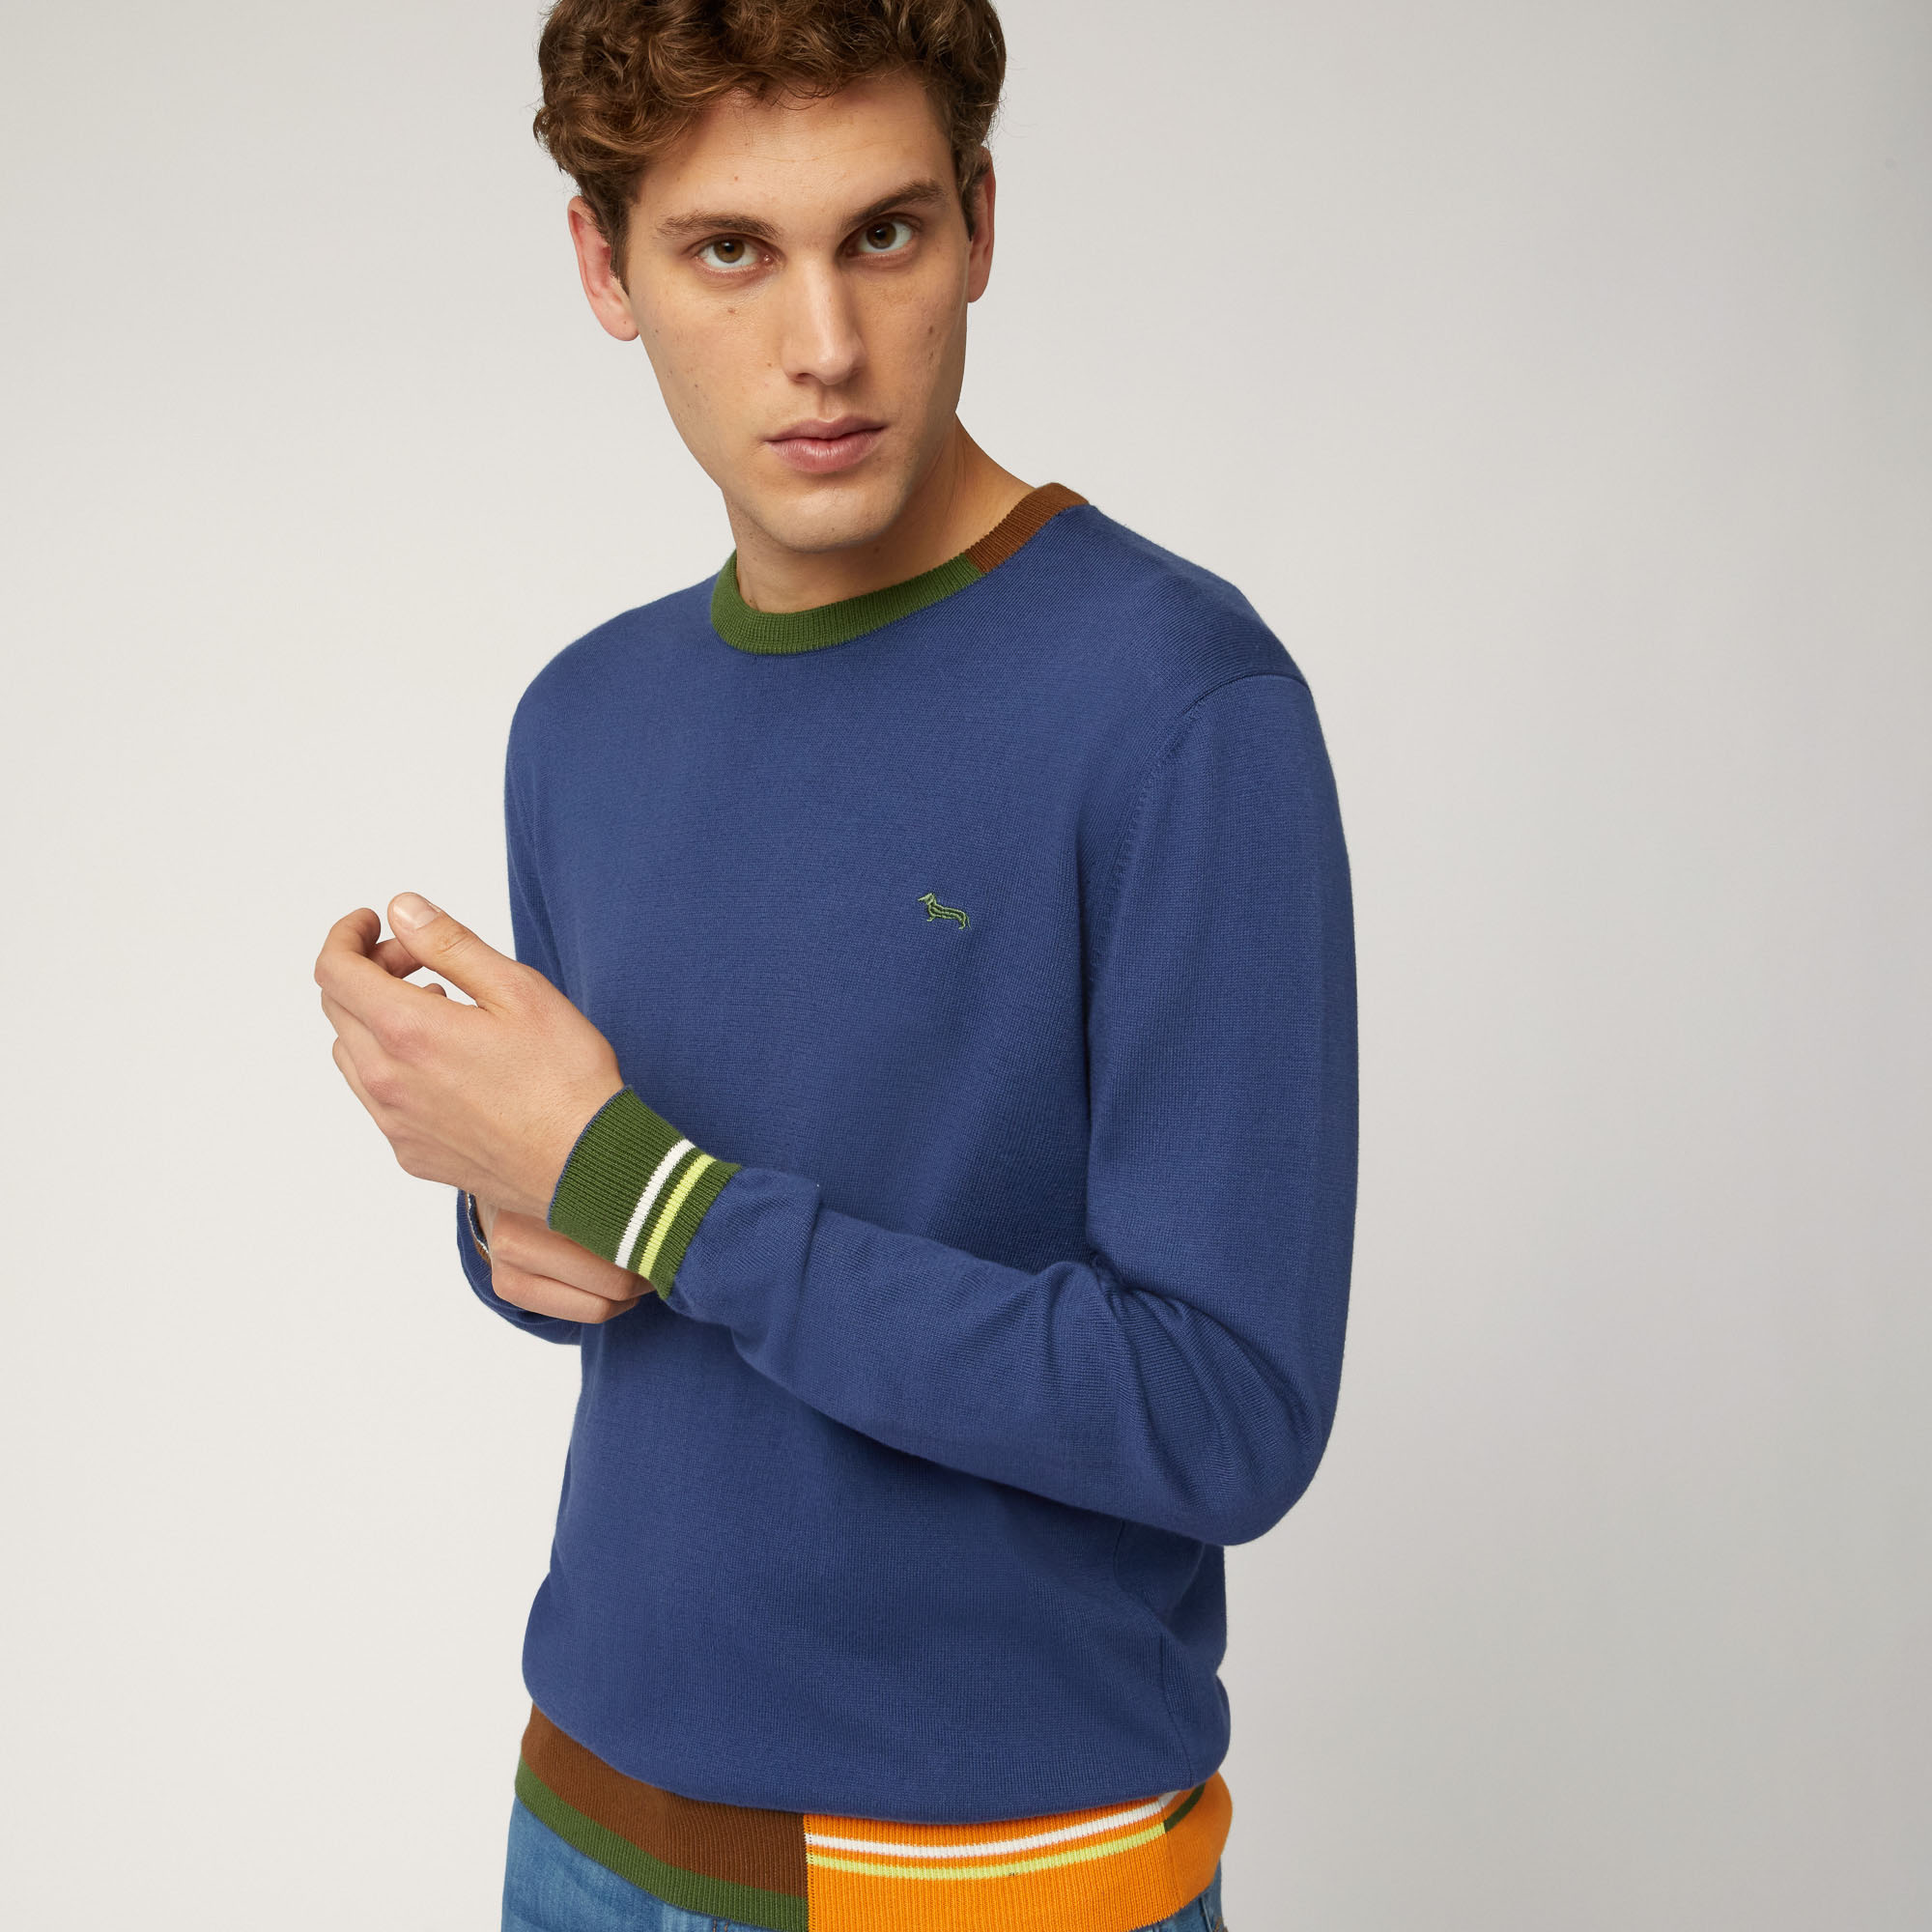 Organic Cotton Crew Neck Pullover with Color Block Details, Blue, large image number 2